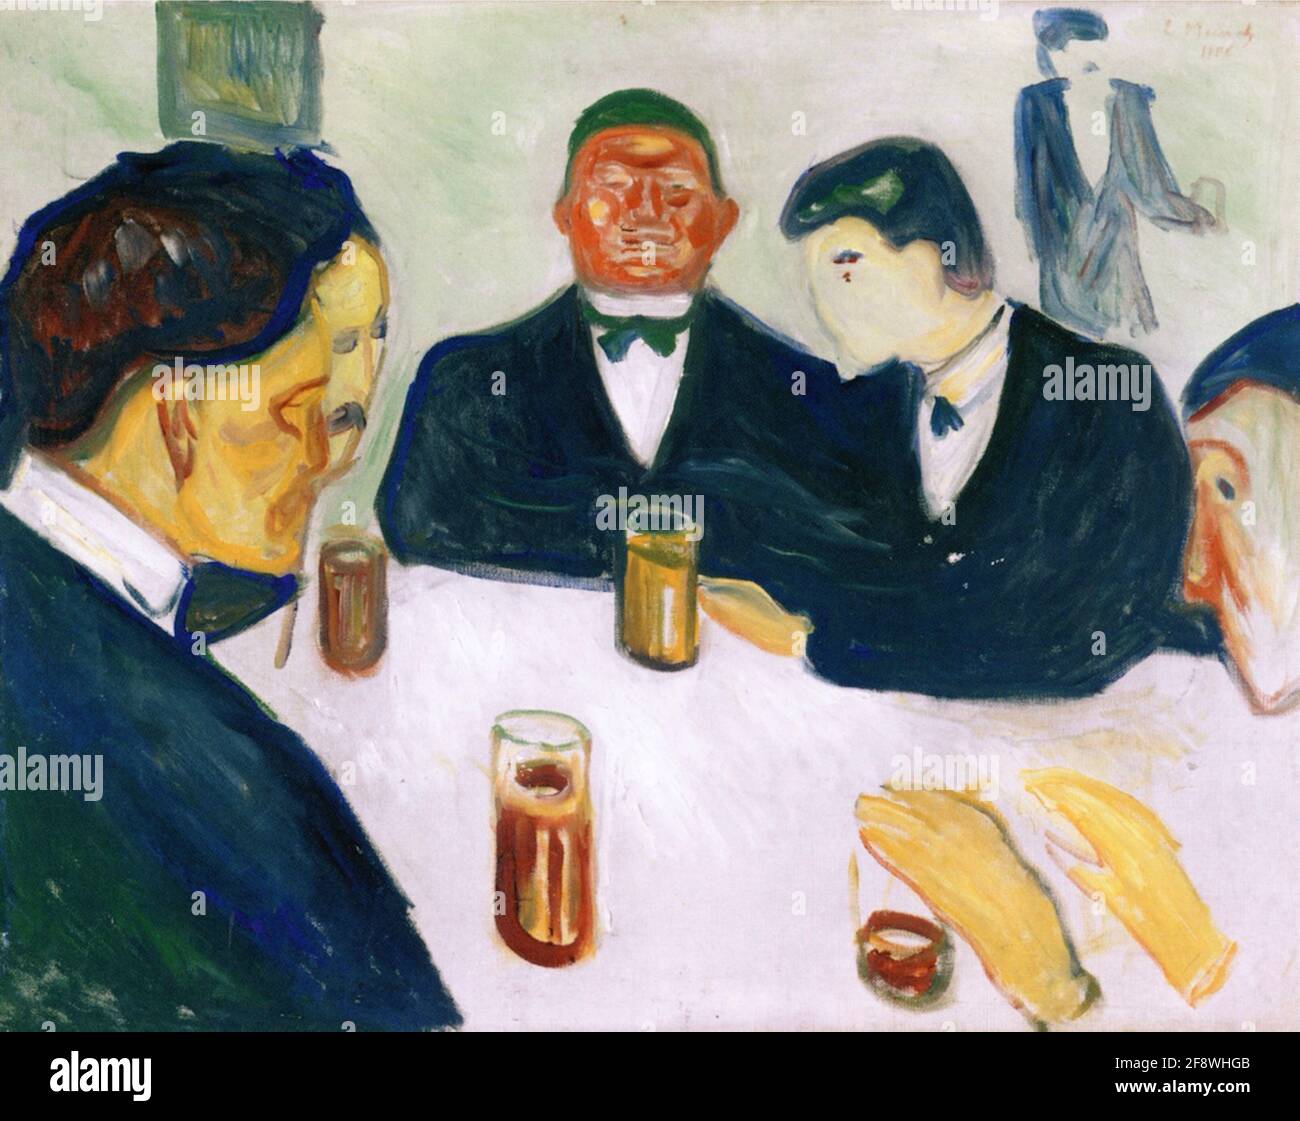 Edvard Munch artwork entitled Drinkers from 1906. A group of men sit around a table engaging in the manly pursuit of drinking. Stock Photo